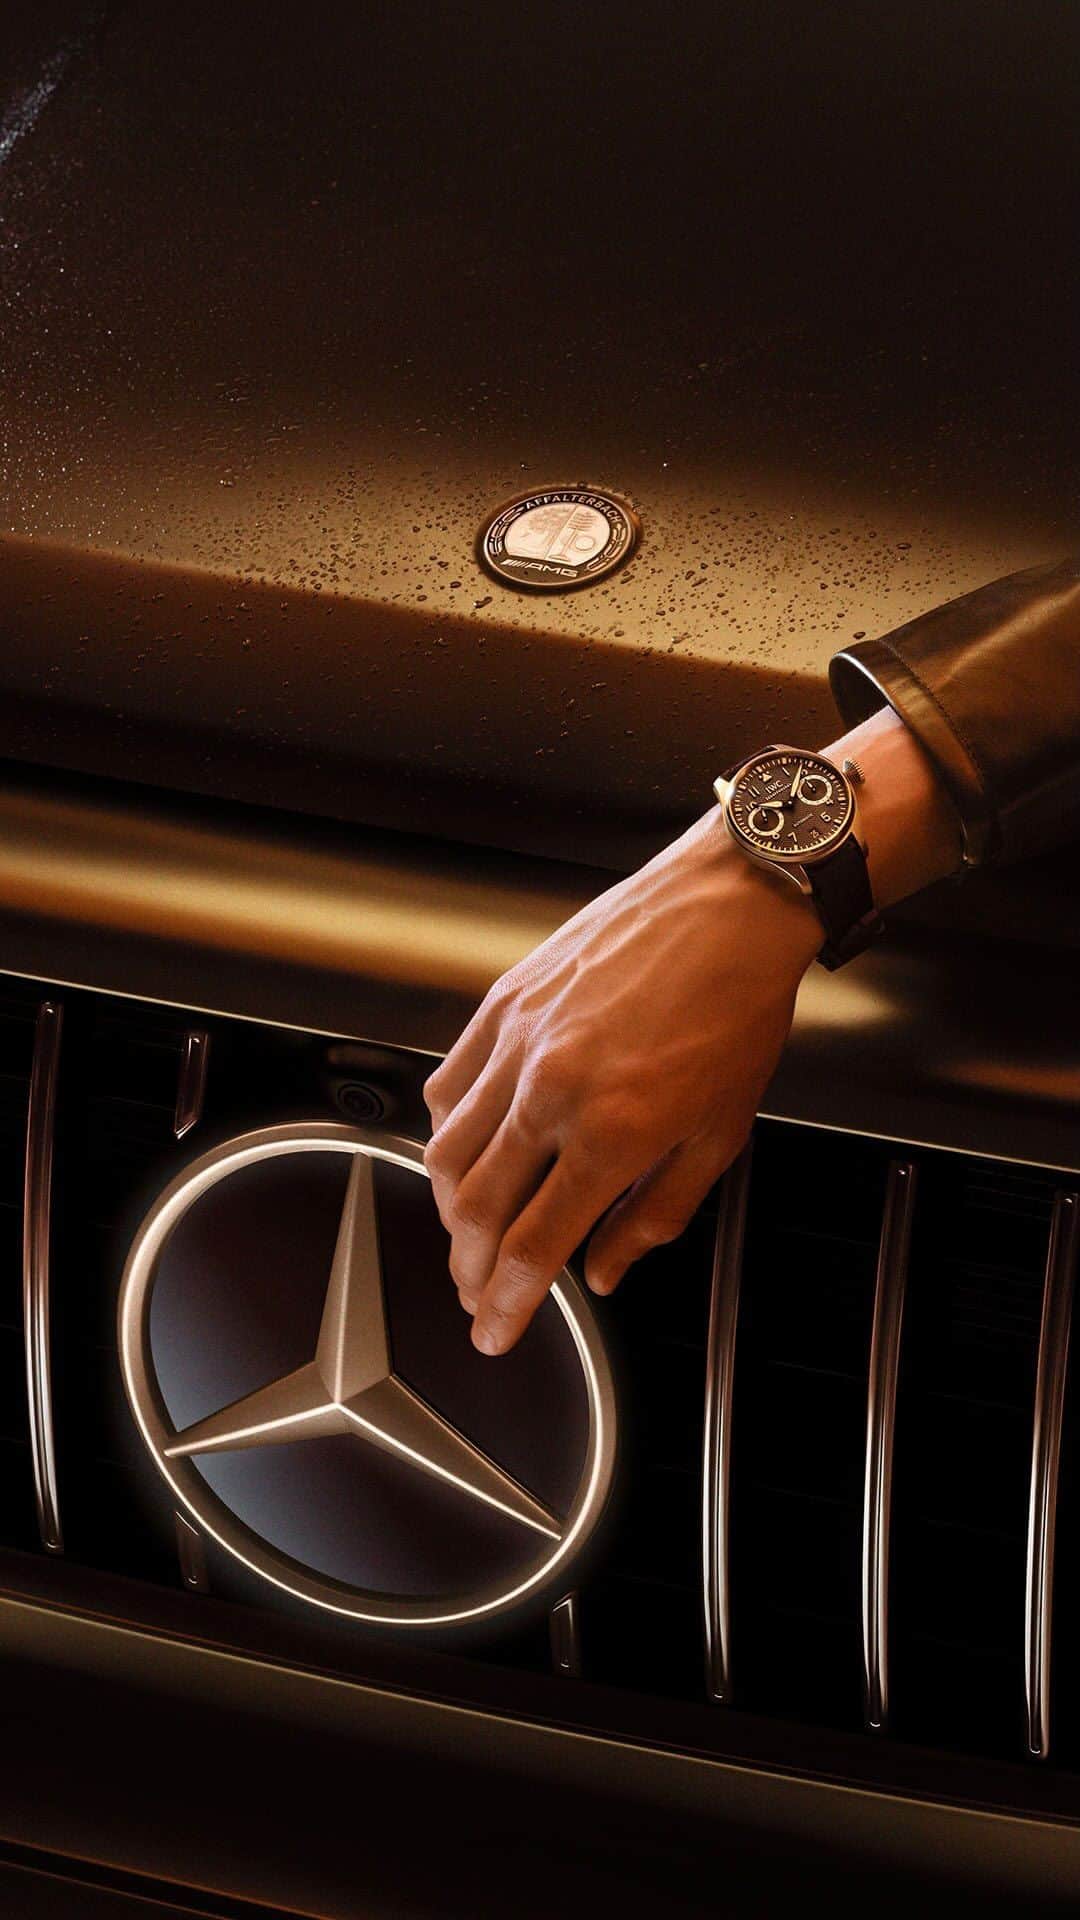 IWCのインスタグラム：「Two icons. One statement.  Inspired by the Mercedes-AMG G 63 “Grand Edition”, IWC Schaffhausen and Mercedes-AMG unveil the Big Pilot’s Watch AMG G 63. This timepiece, encased in 18-carat Armor Gold®, mirrors the G 63’s blend of durability and style, redefining luxury.  🔗Link in Bio   #IWCxAMG | #IWCPilot | #IWCRacing | #GClass | #MercedesAMG | #GrandEdition   [Mercedes-AMG G 63 | WLTP: Kraftstoffverbrauch kombiniert: 16.2 l/100 km | CO₂-Emissionen kombiniert: 369 g/km | amg4.me/DAT-Leitfaden]」